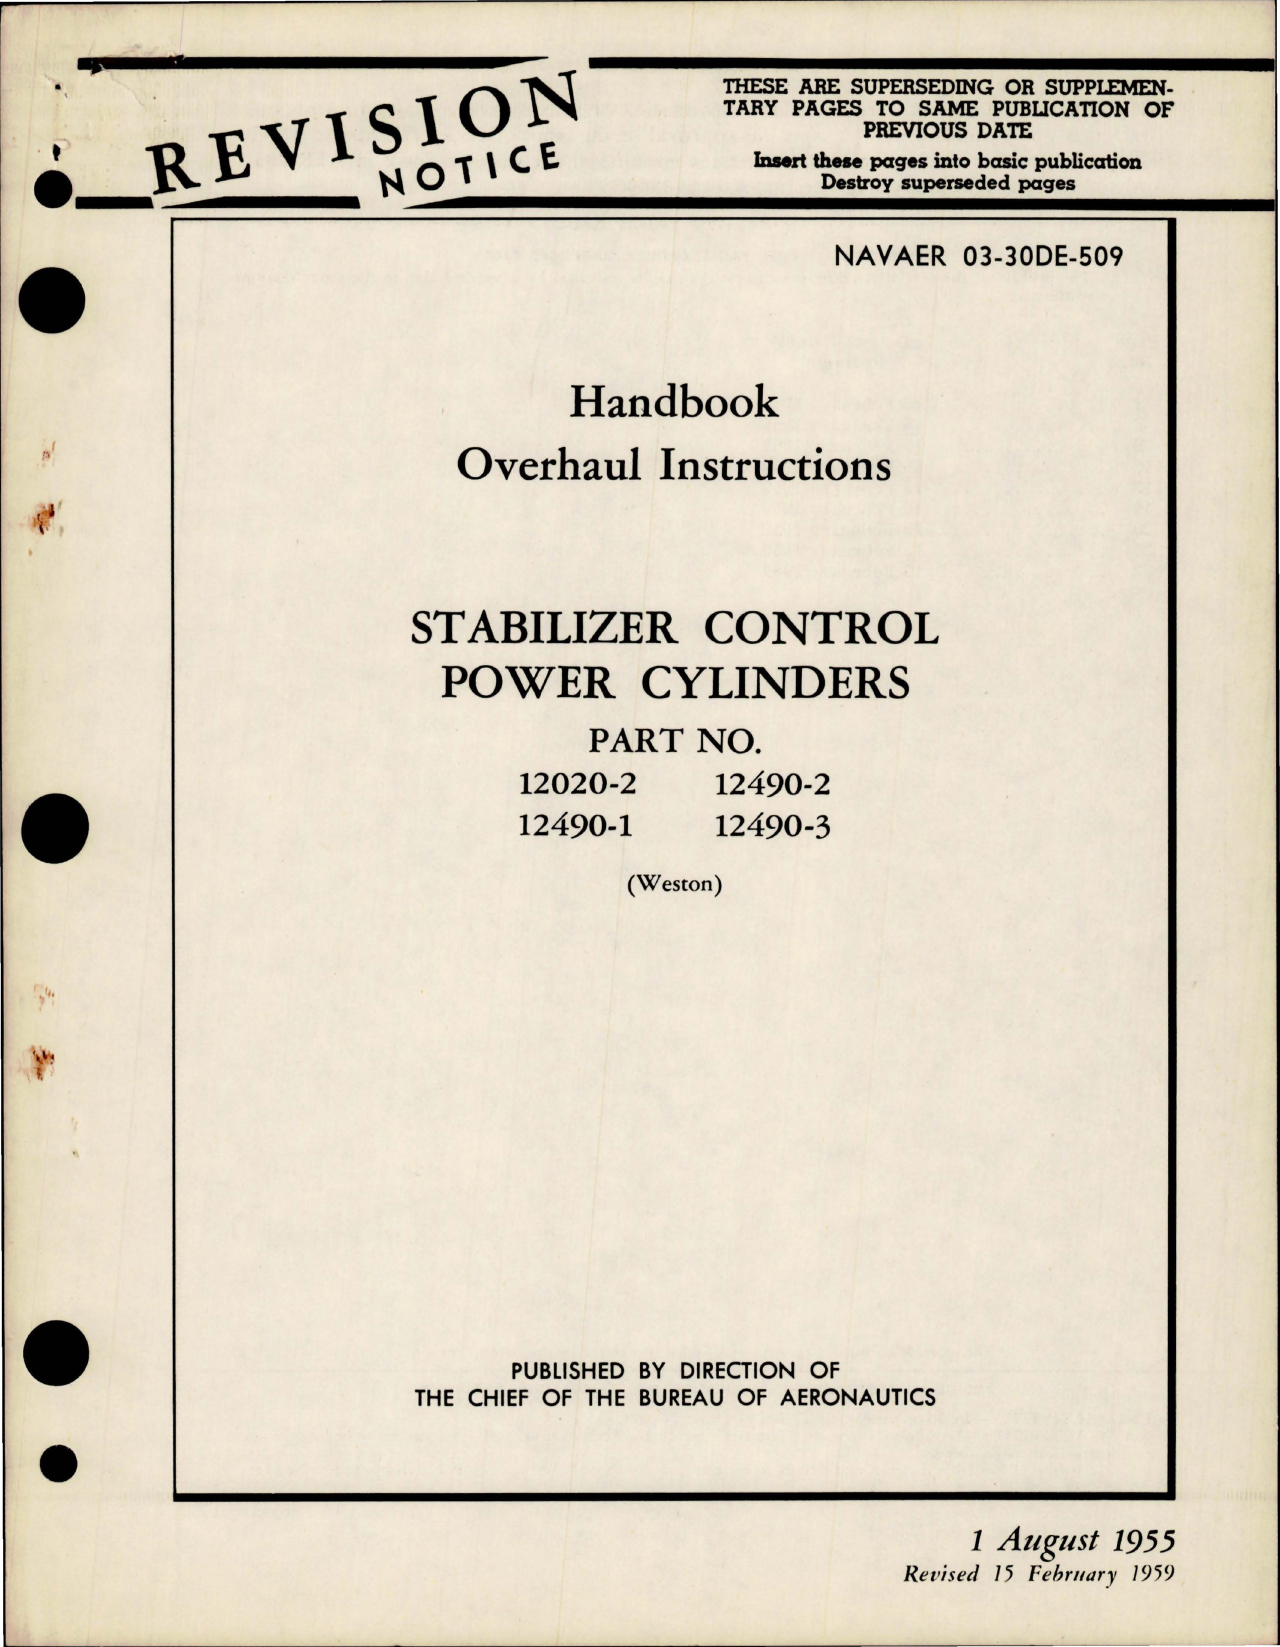 Sample page 1 from AirCorps Library document: Overhaul Instructions for Stabilizer Control Power Cylinders - Parts 12020-2, 12490-1, 12490-2, 12490-3 